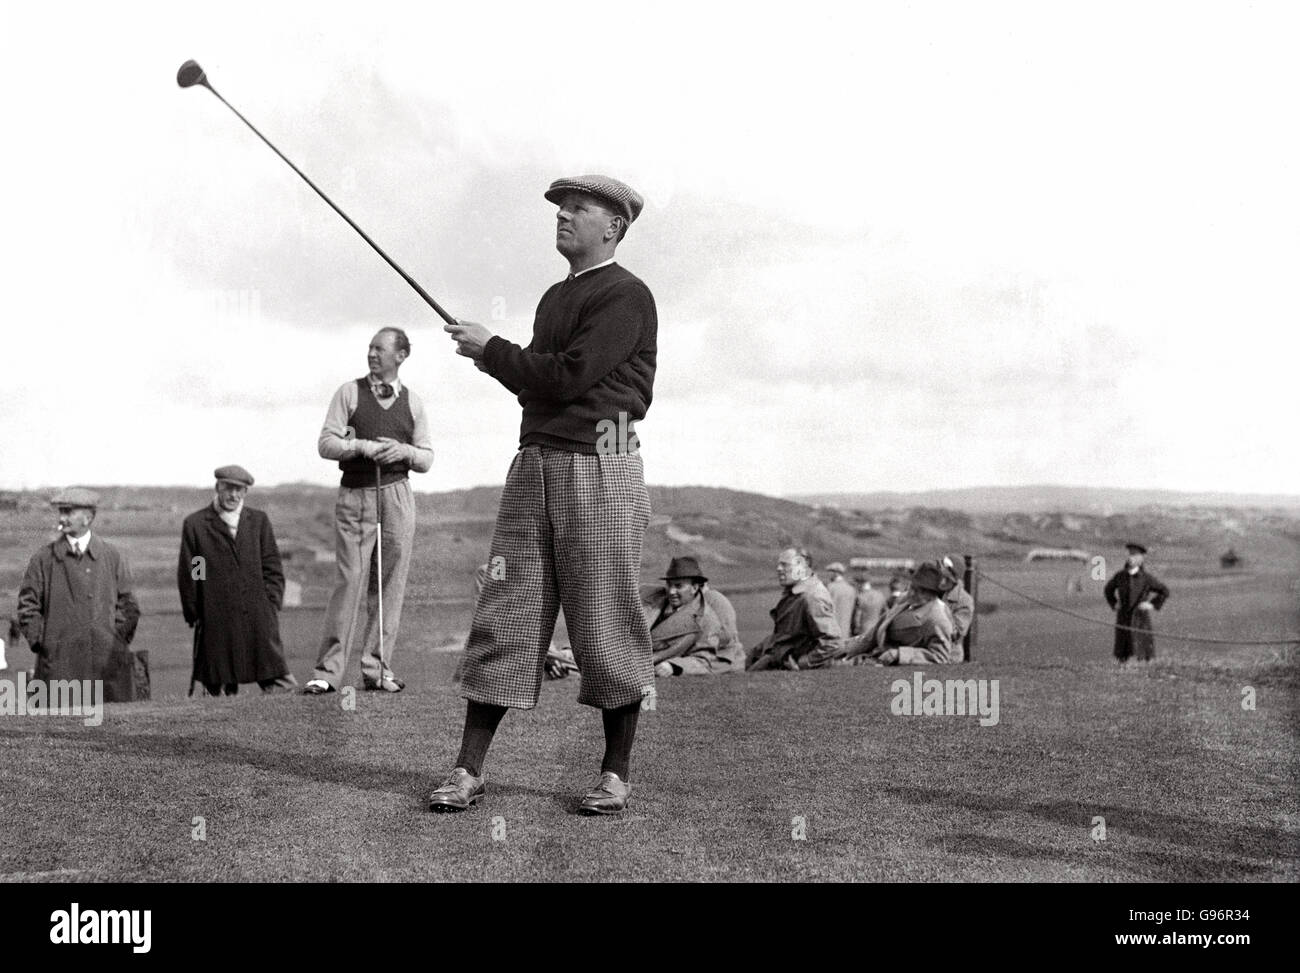 Golf Fashion - 1931. Golf fashions in the 1930s. Stock Photo